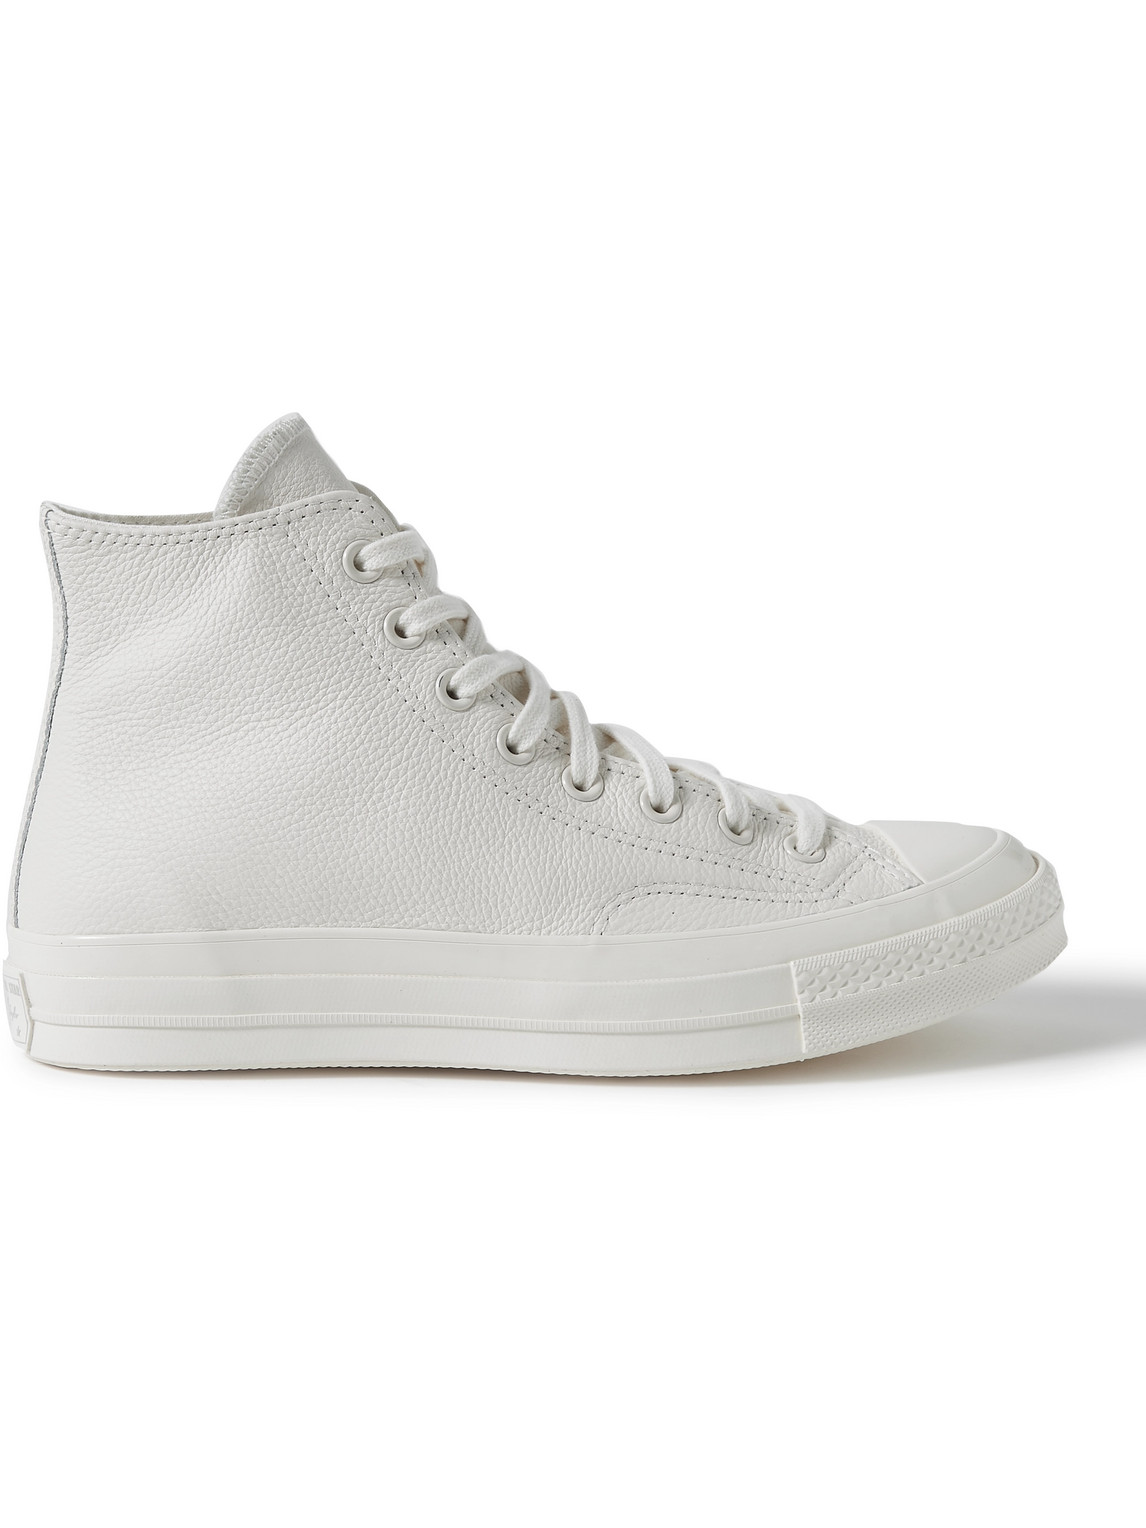 Converse Chuck 70 Full-grain Leather High-top Sneakers In White